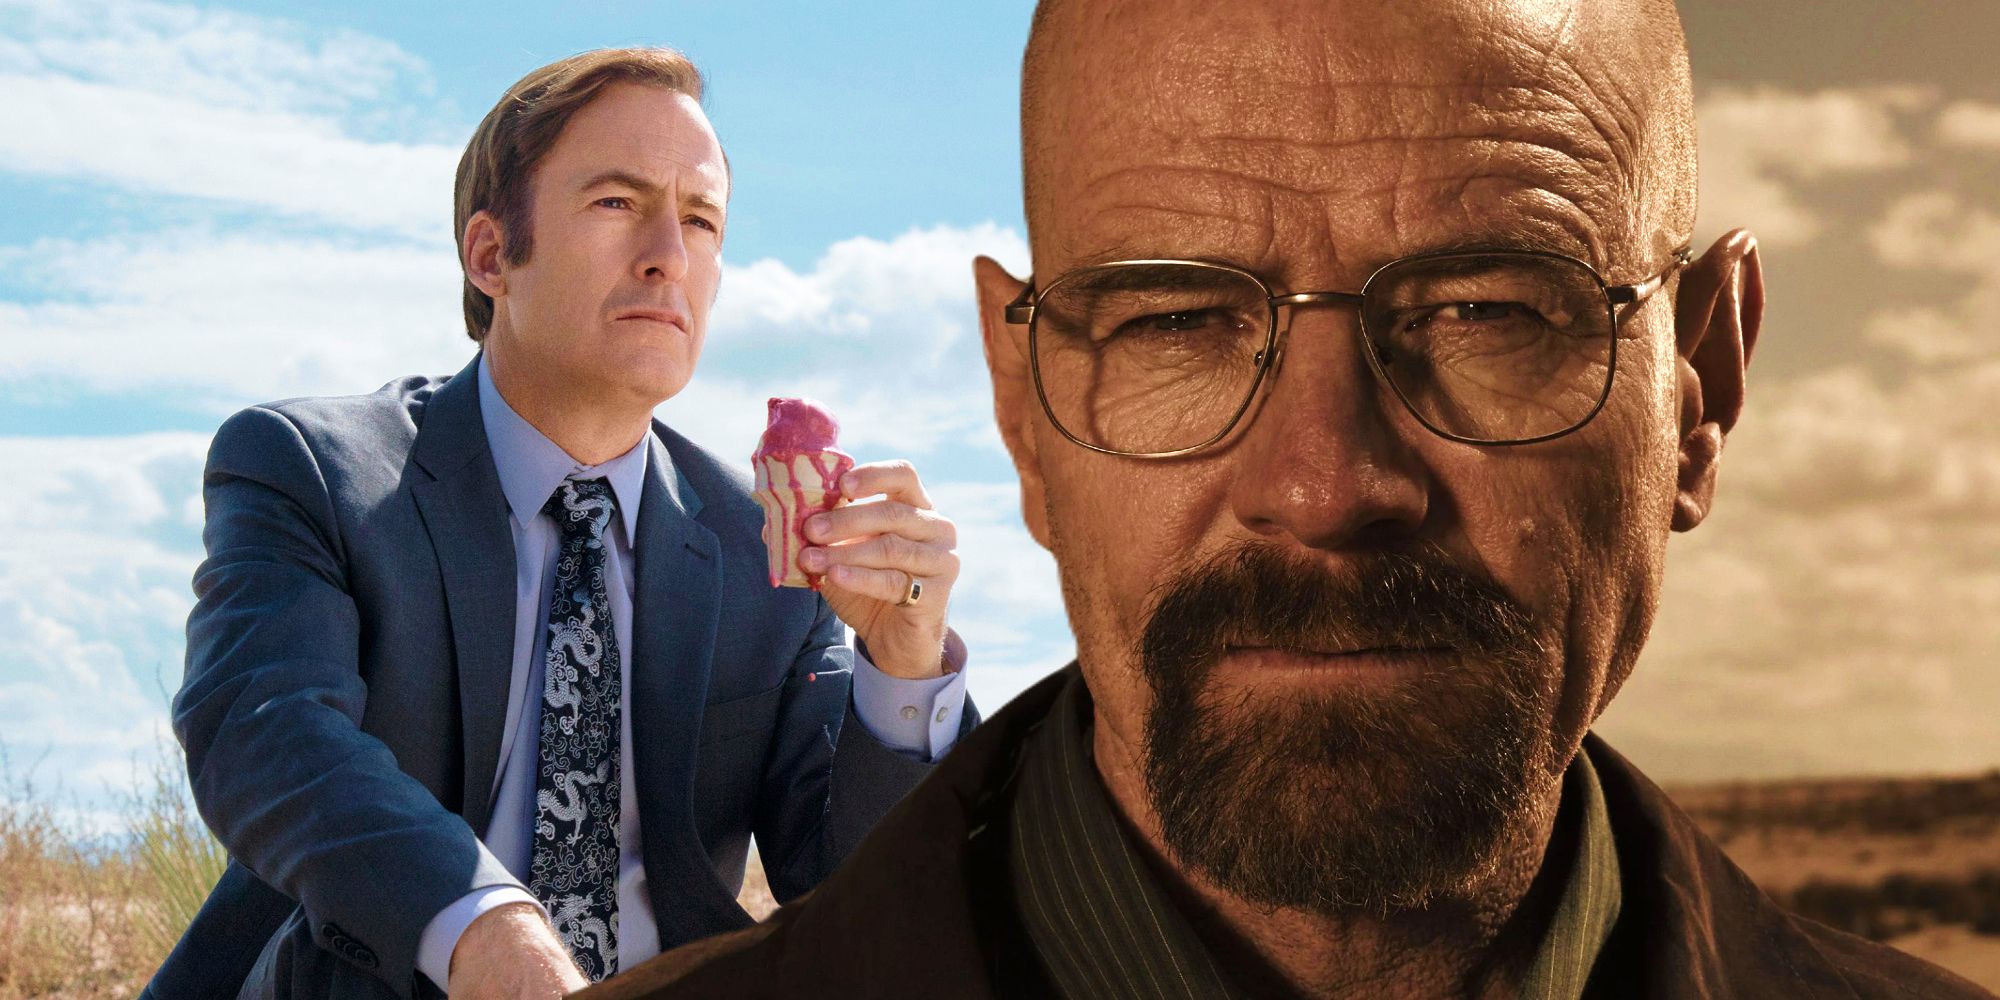 Jimmy McGill in Better Call Saul and Walter White in Breaking Bad